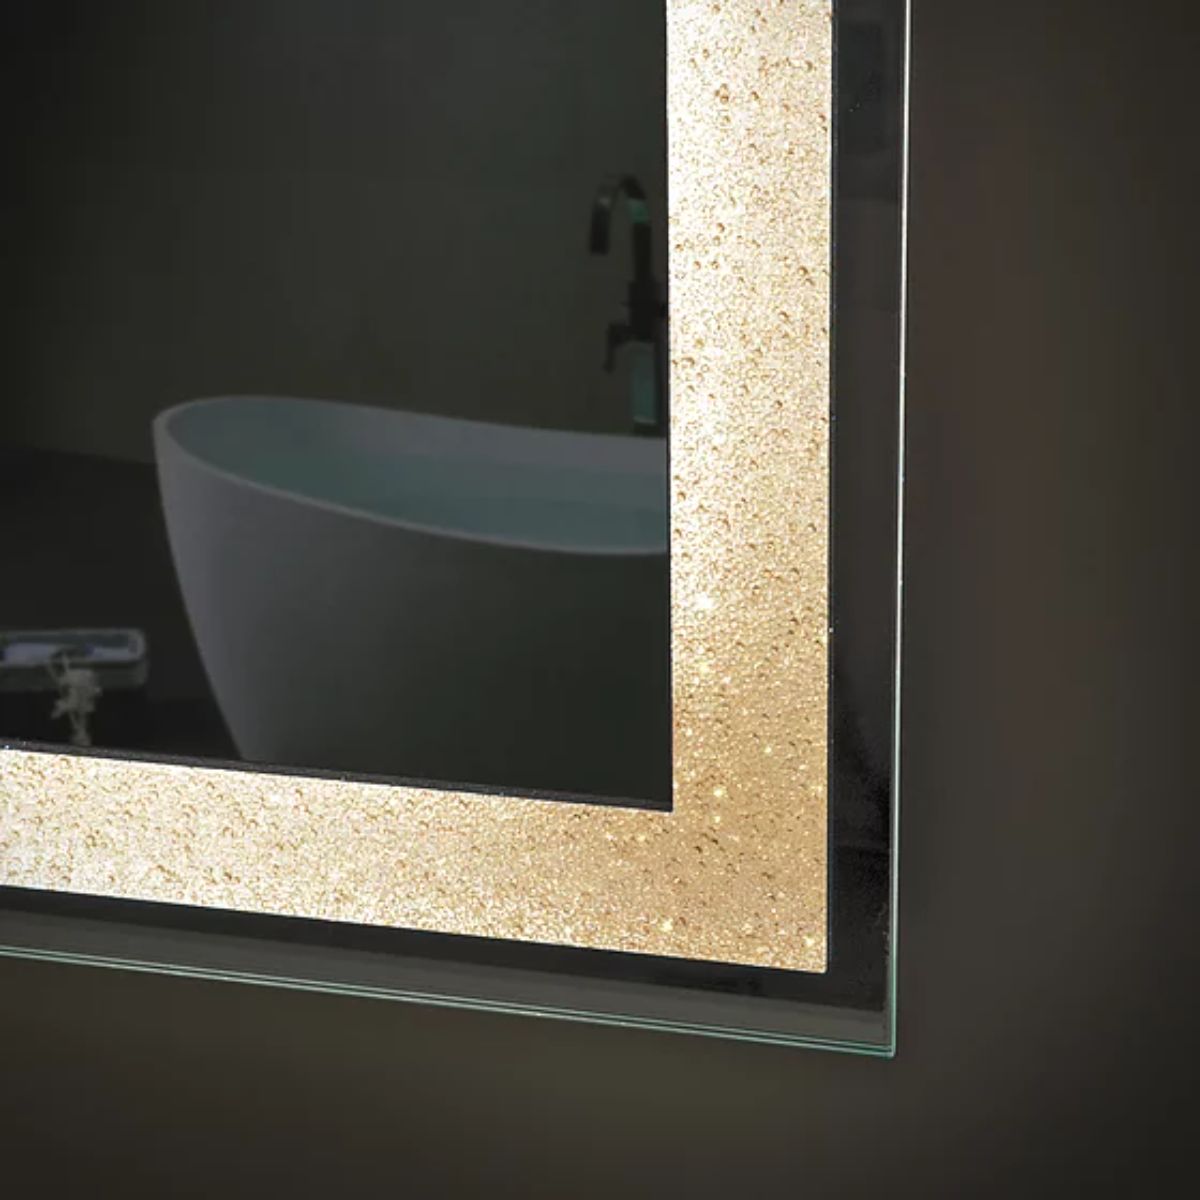 Edison Crystal 24 in. x 32 in. LED Wall Mirror with Touch On/Off Dimmer Function